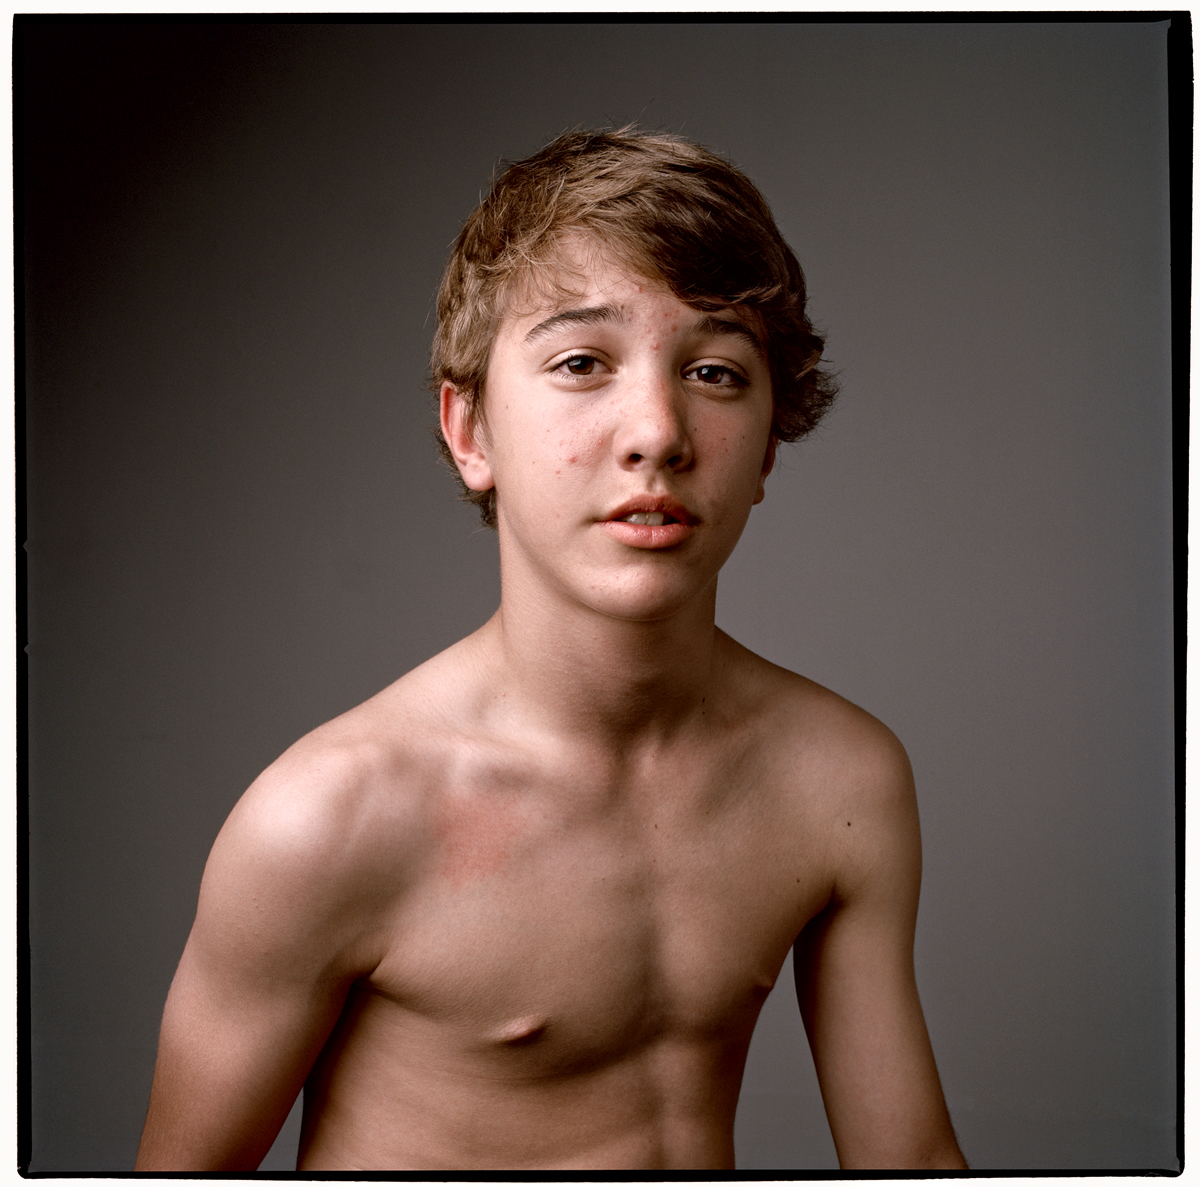 art photo film photography Hasselblad Portraiture boys teenagers vulnerability colour nude man conceptual diptych